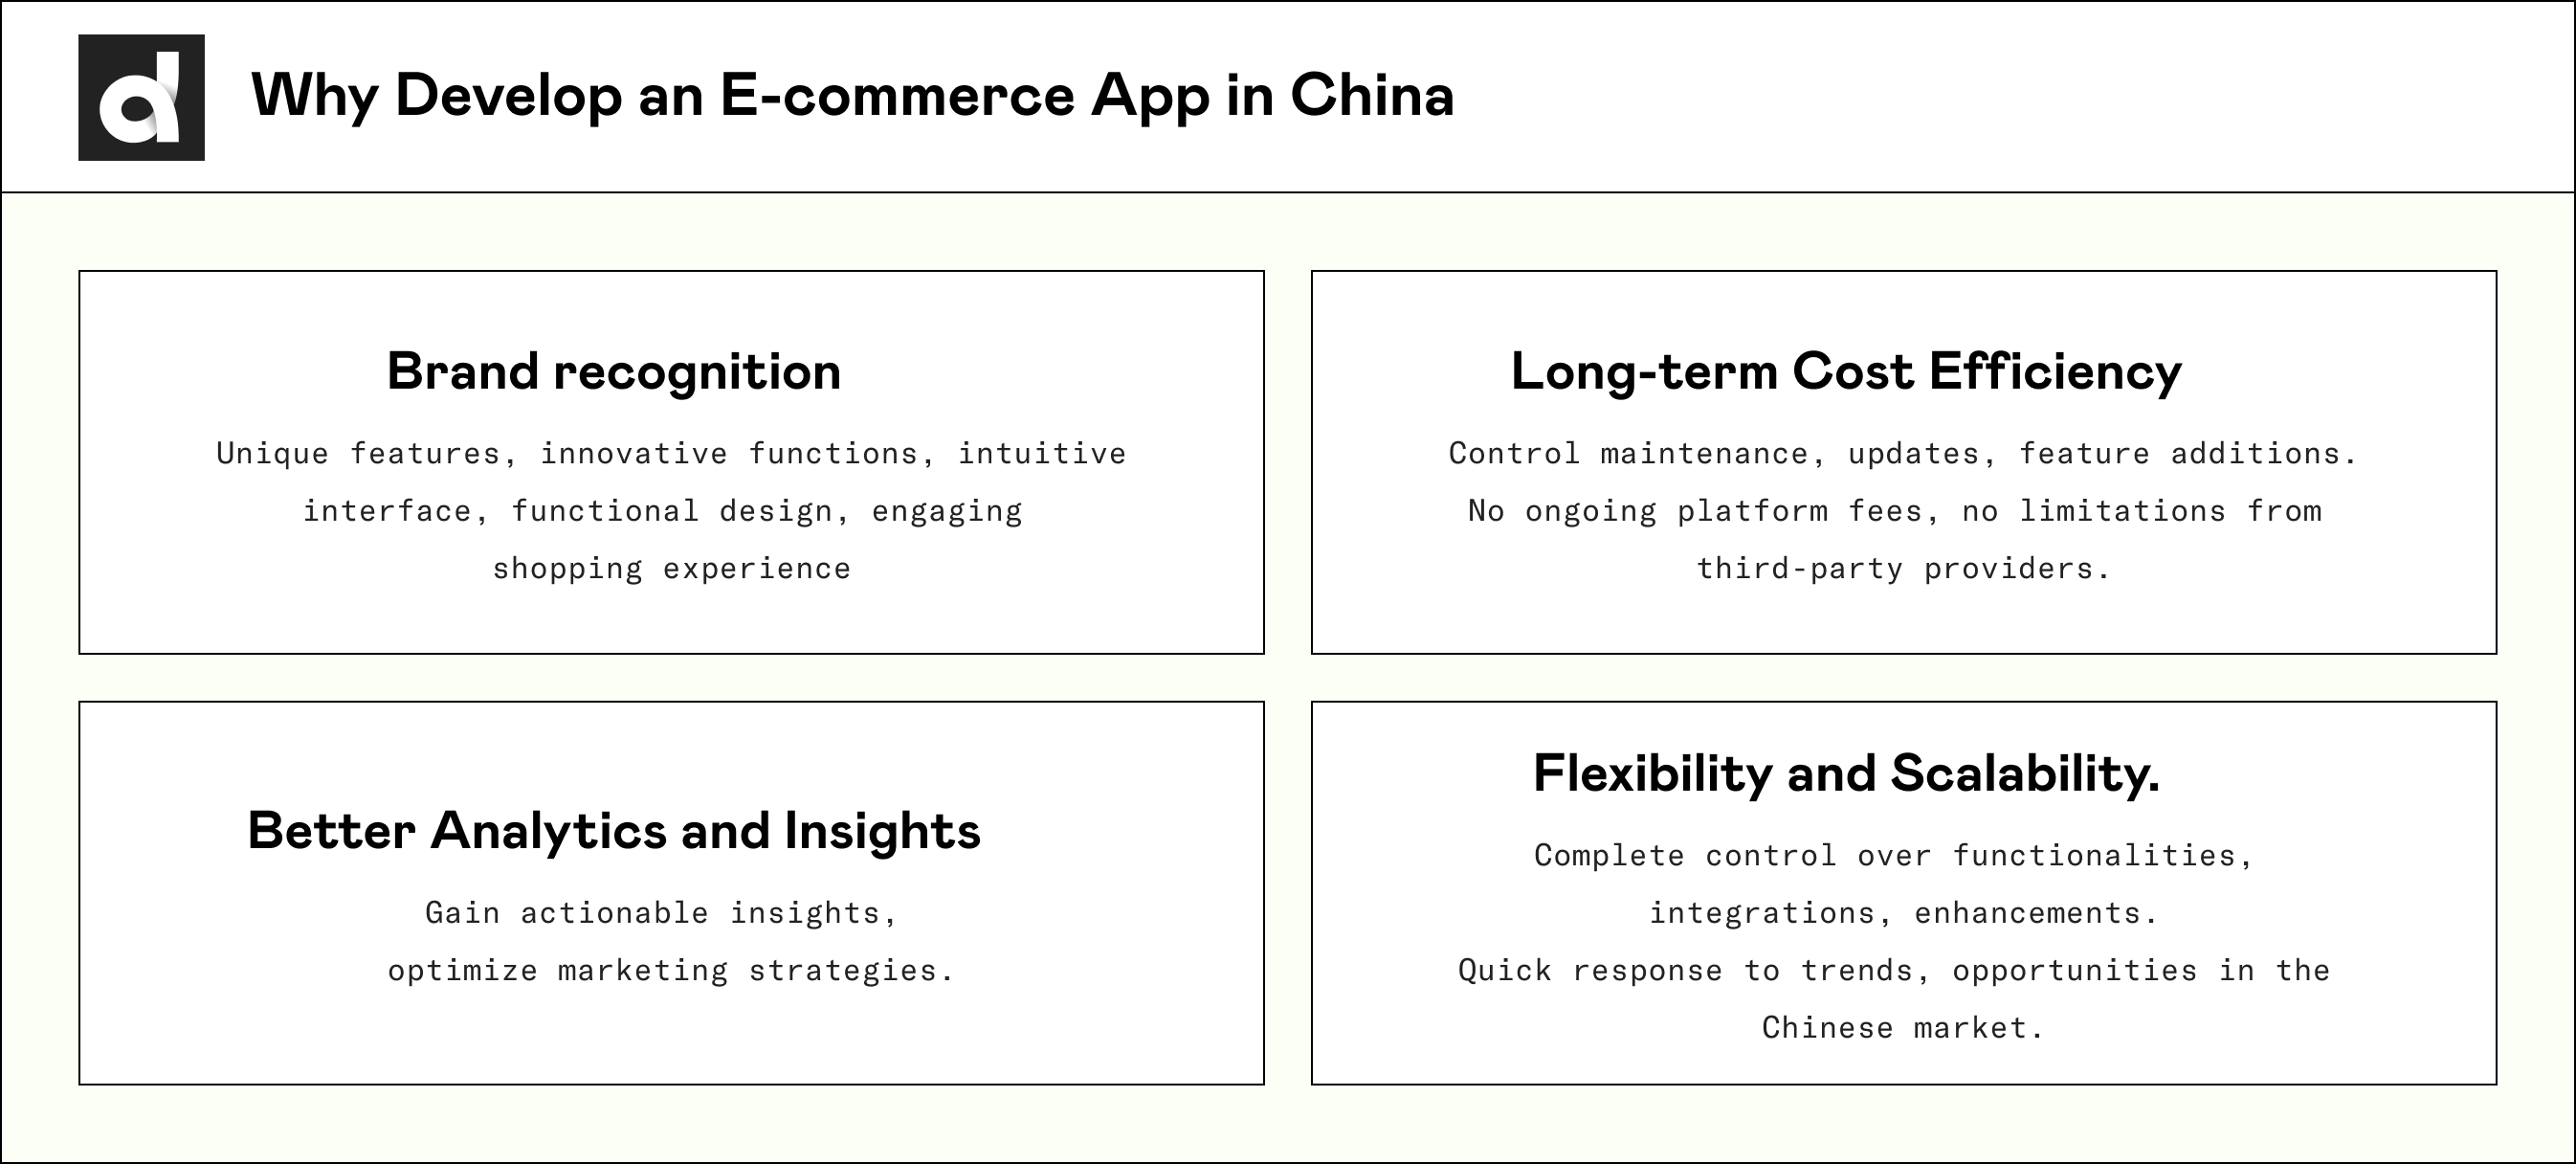 infographic listing reasons for why one might need to develop an ecommerce app in China; summary of why develop a custom app for Chinese market